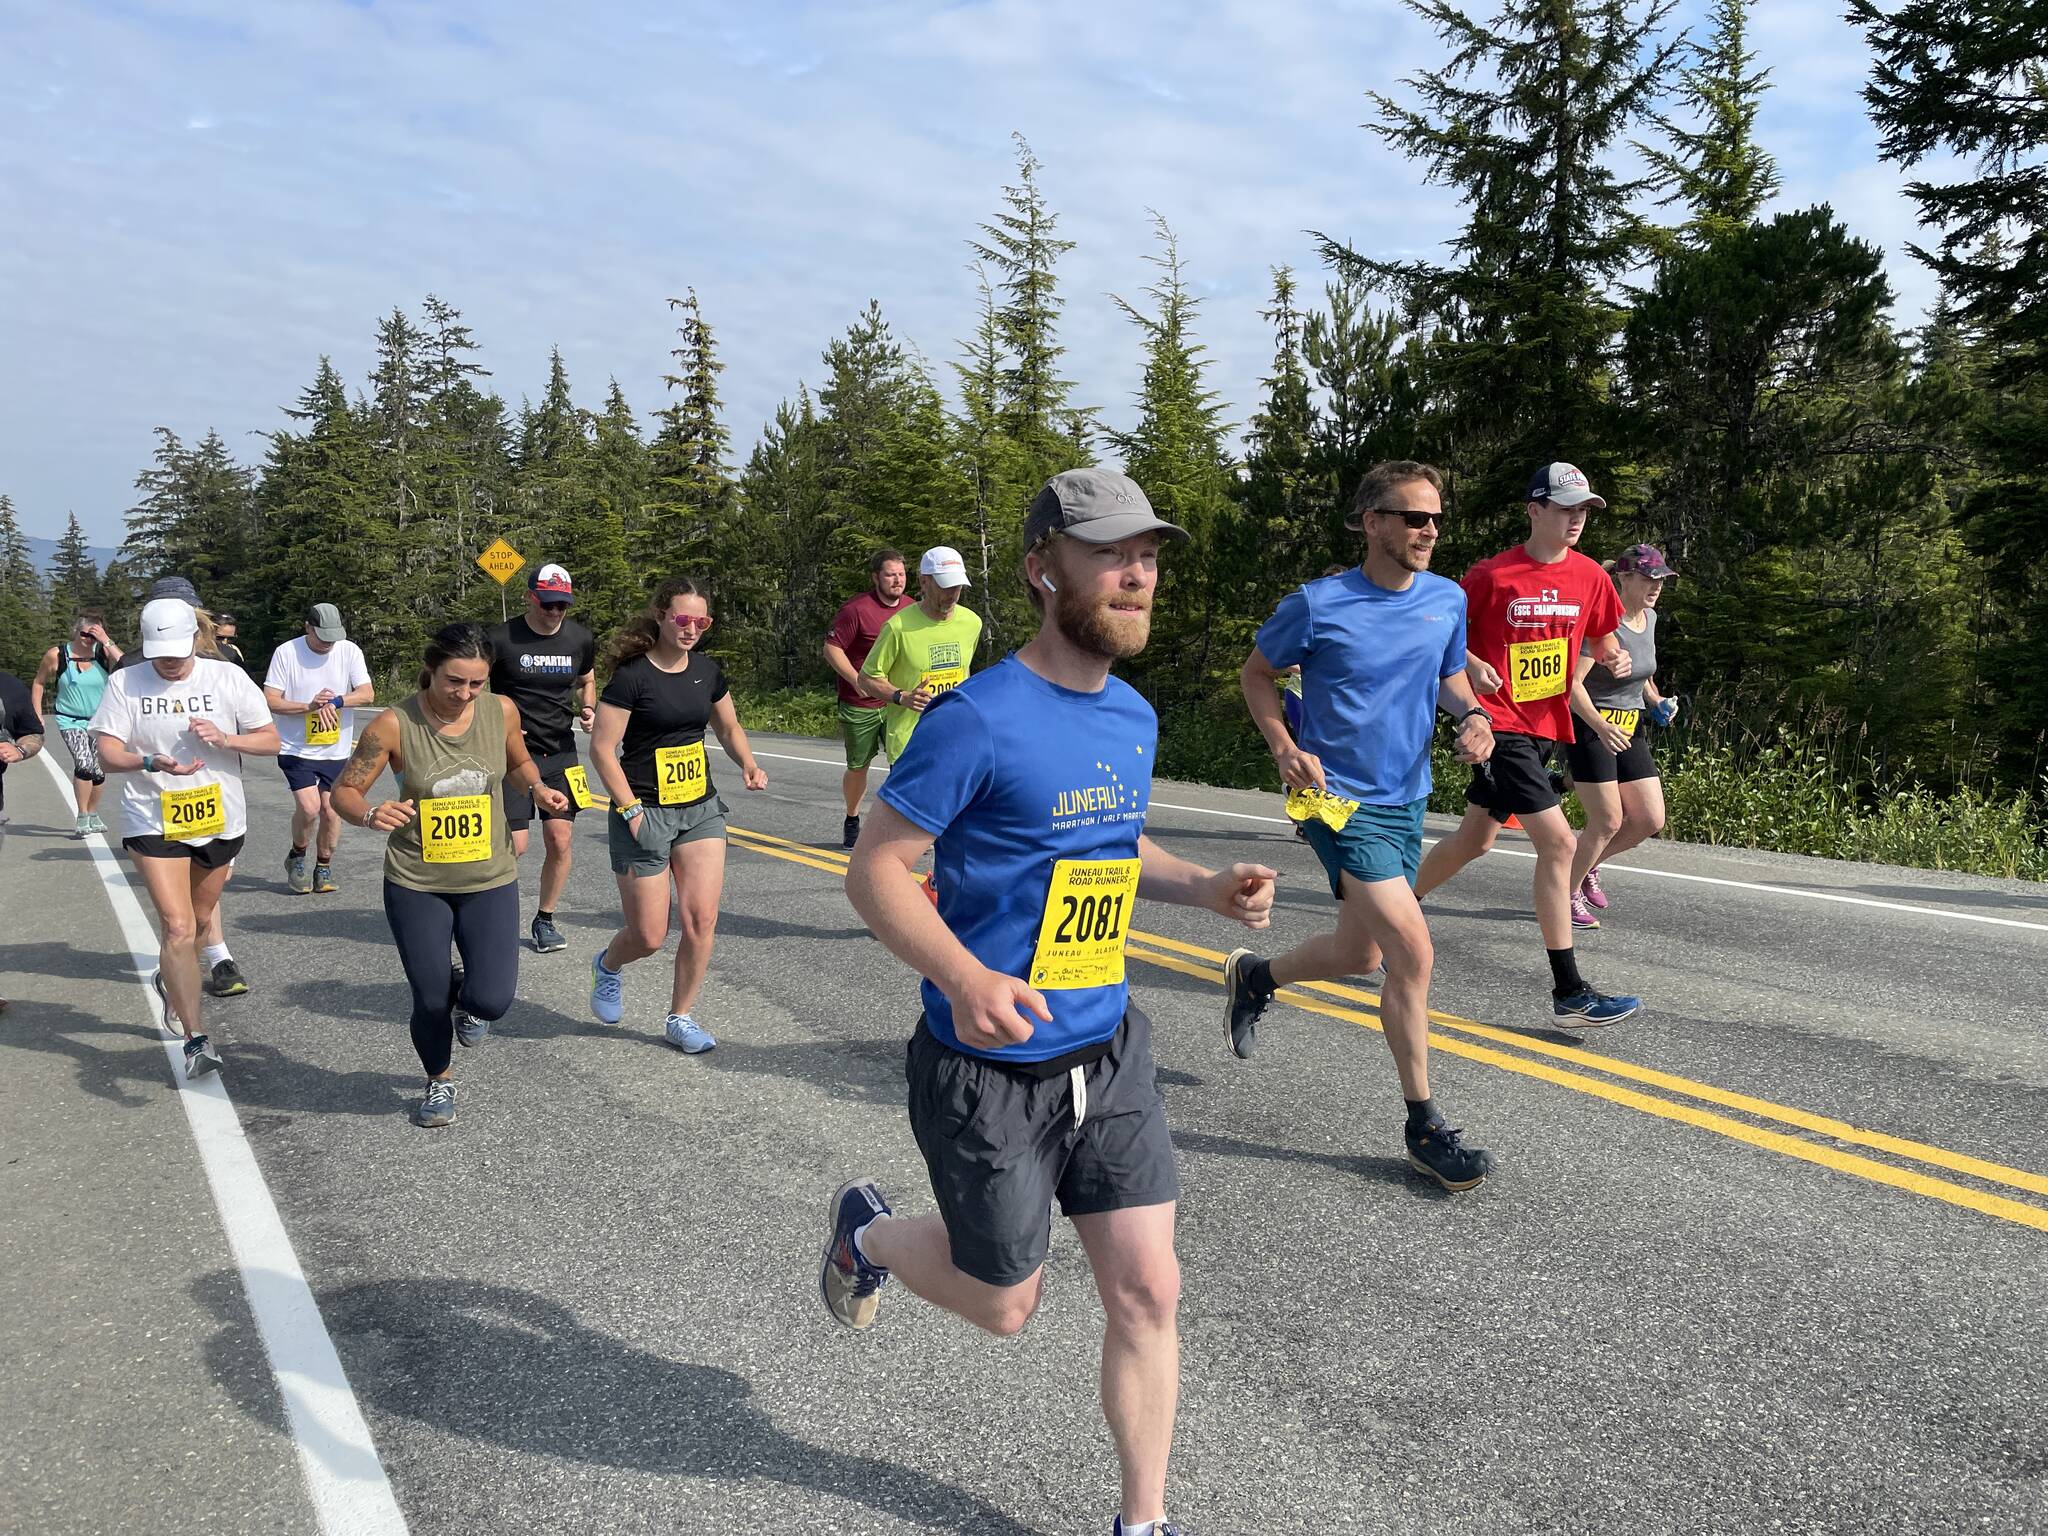 Runners race off the starting line during the Eaglecrest Road and Ridge Race on July 2, 2022. (Michael S. Lockett / Juneau Empire)